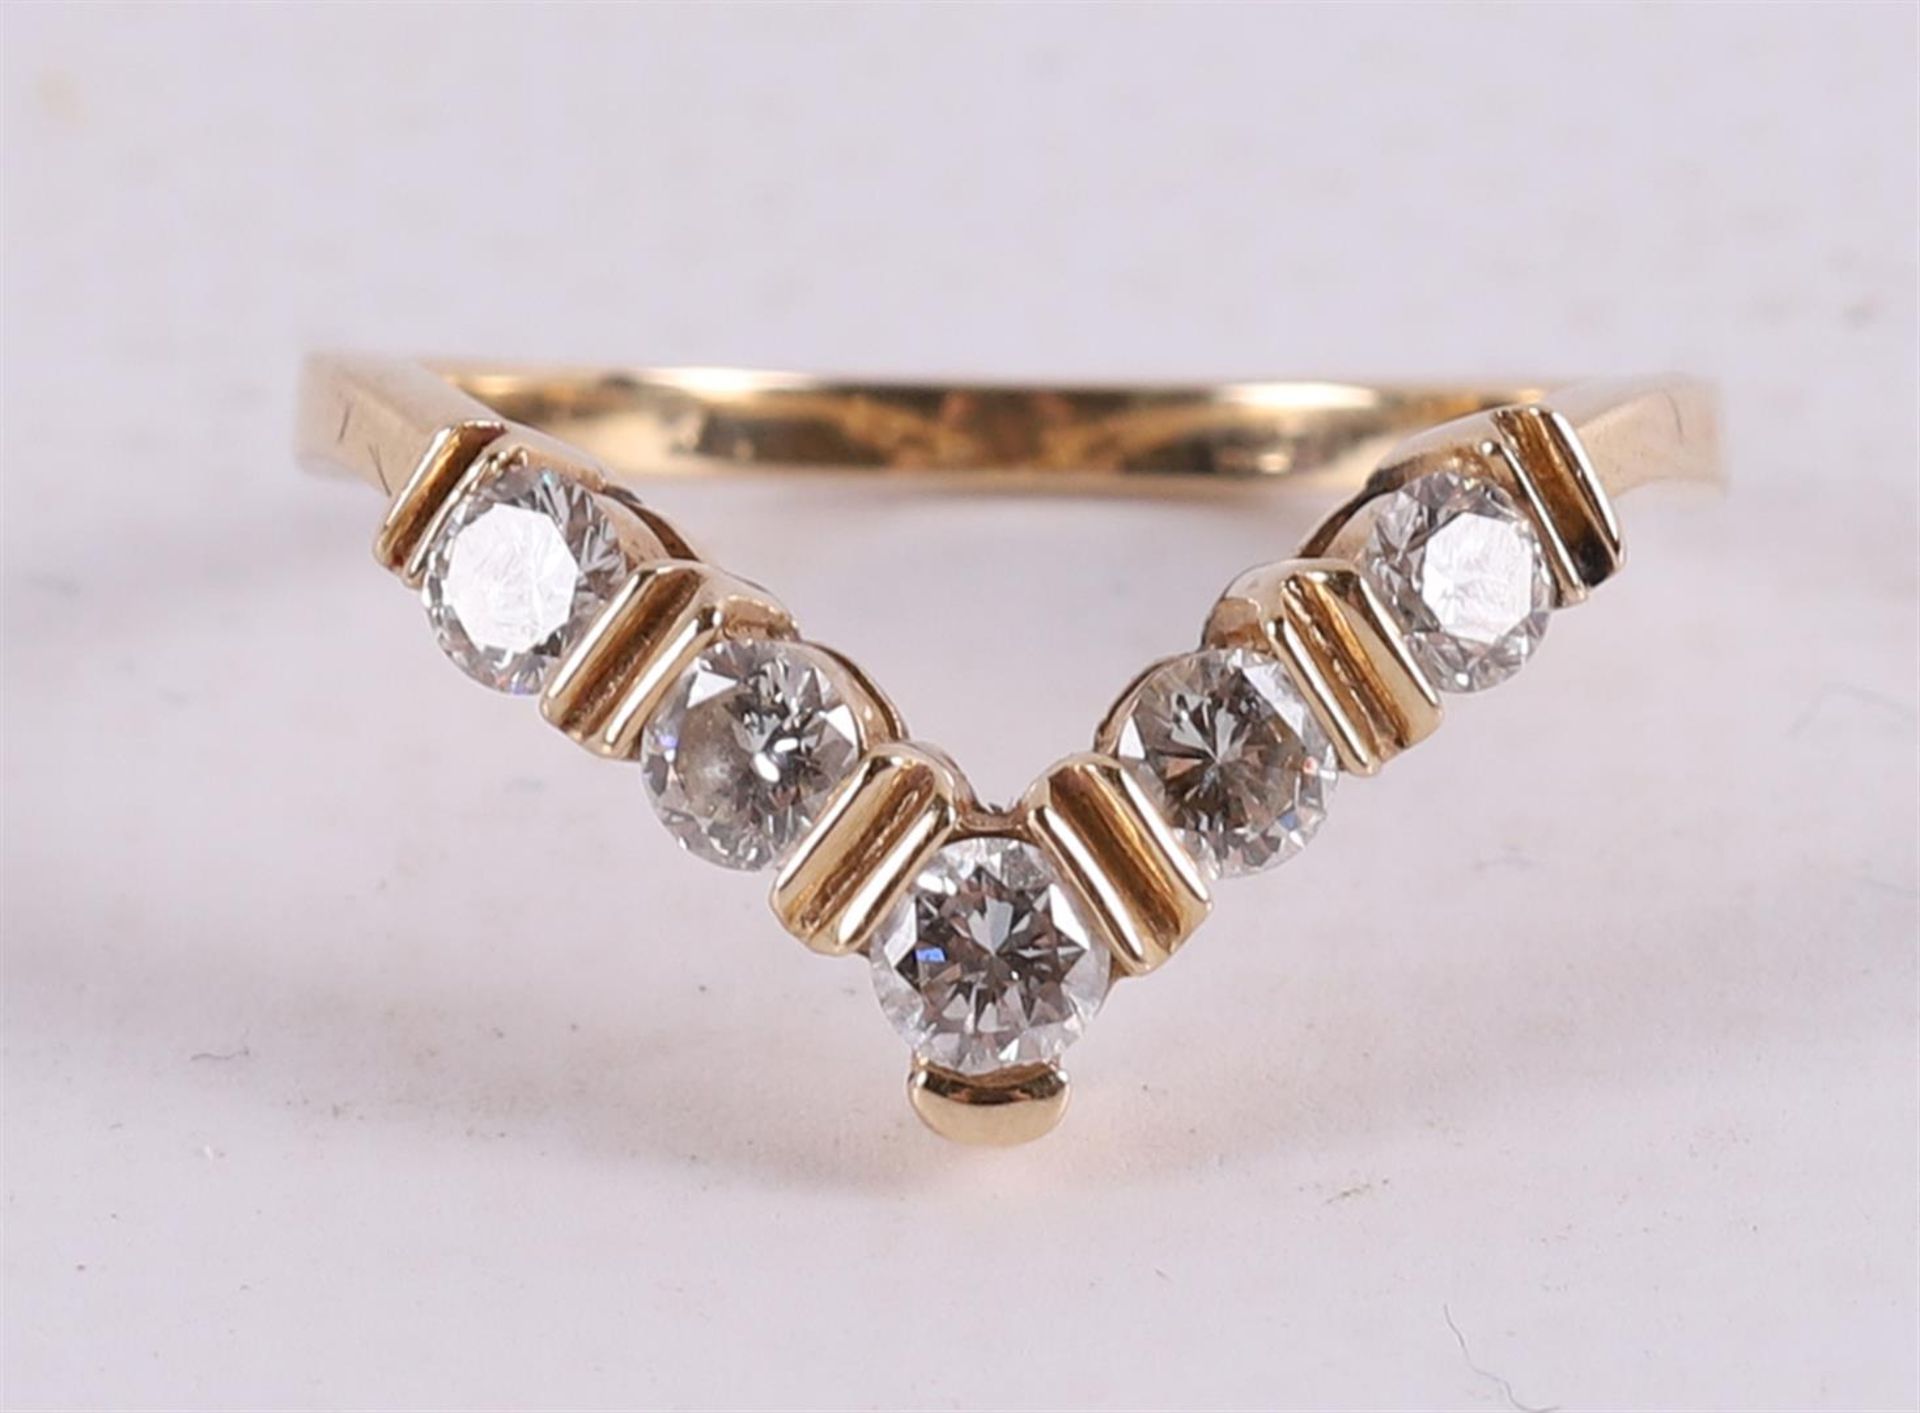 A 14 kt 585/1000 yellow gold vintage women's ring, set with five diamonds.